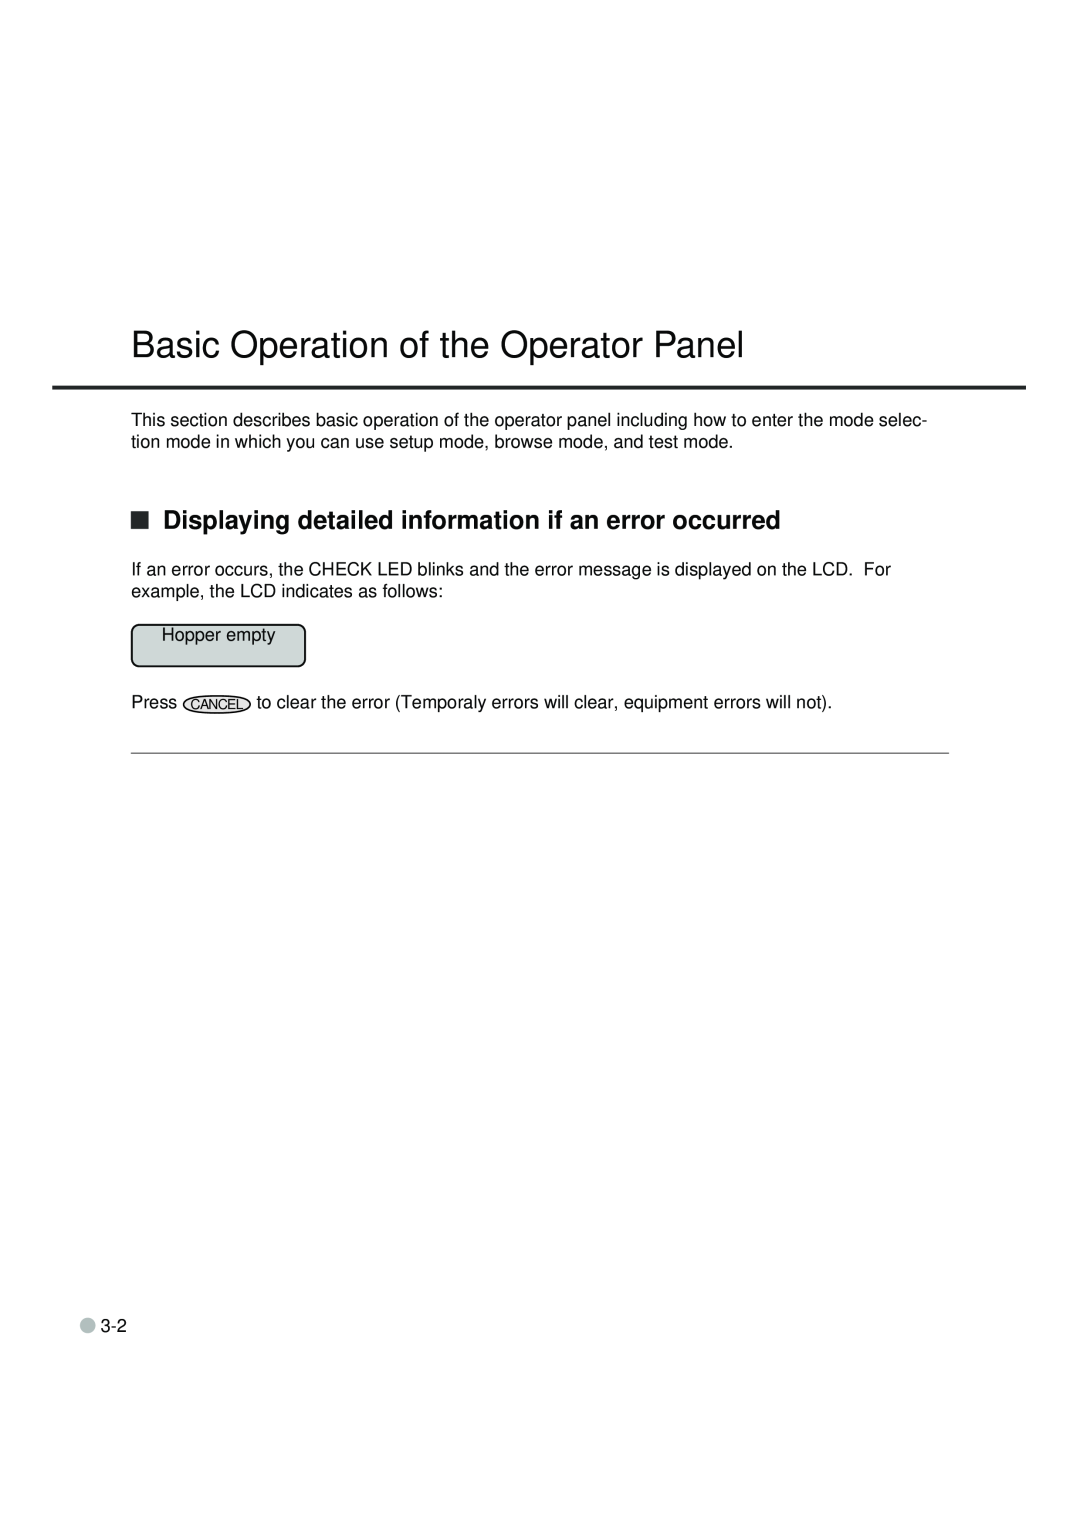 Fujitsu fi-4990C manual Basic Operation of the Operator Panel, Displaying detailed information if an error occurred 